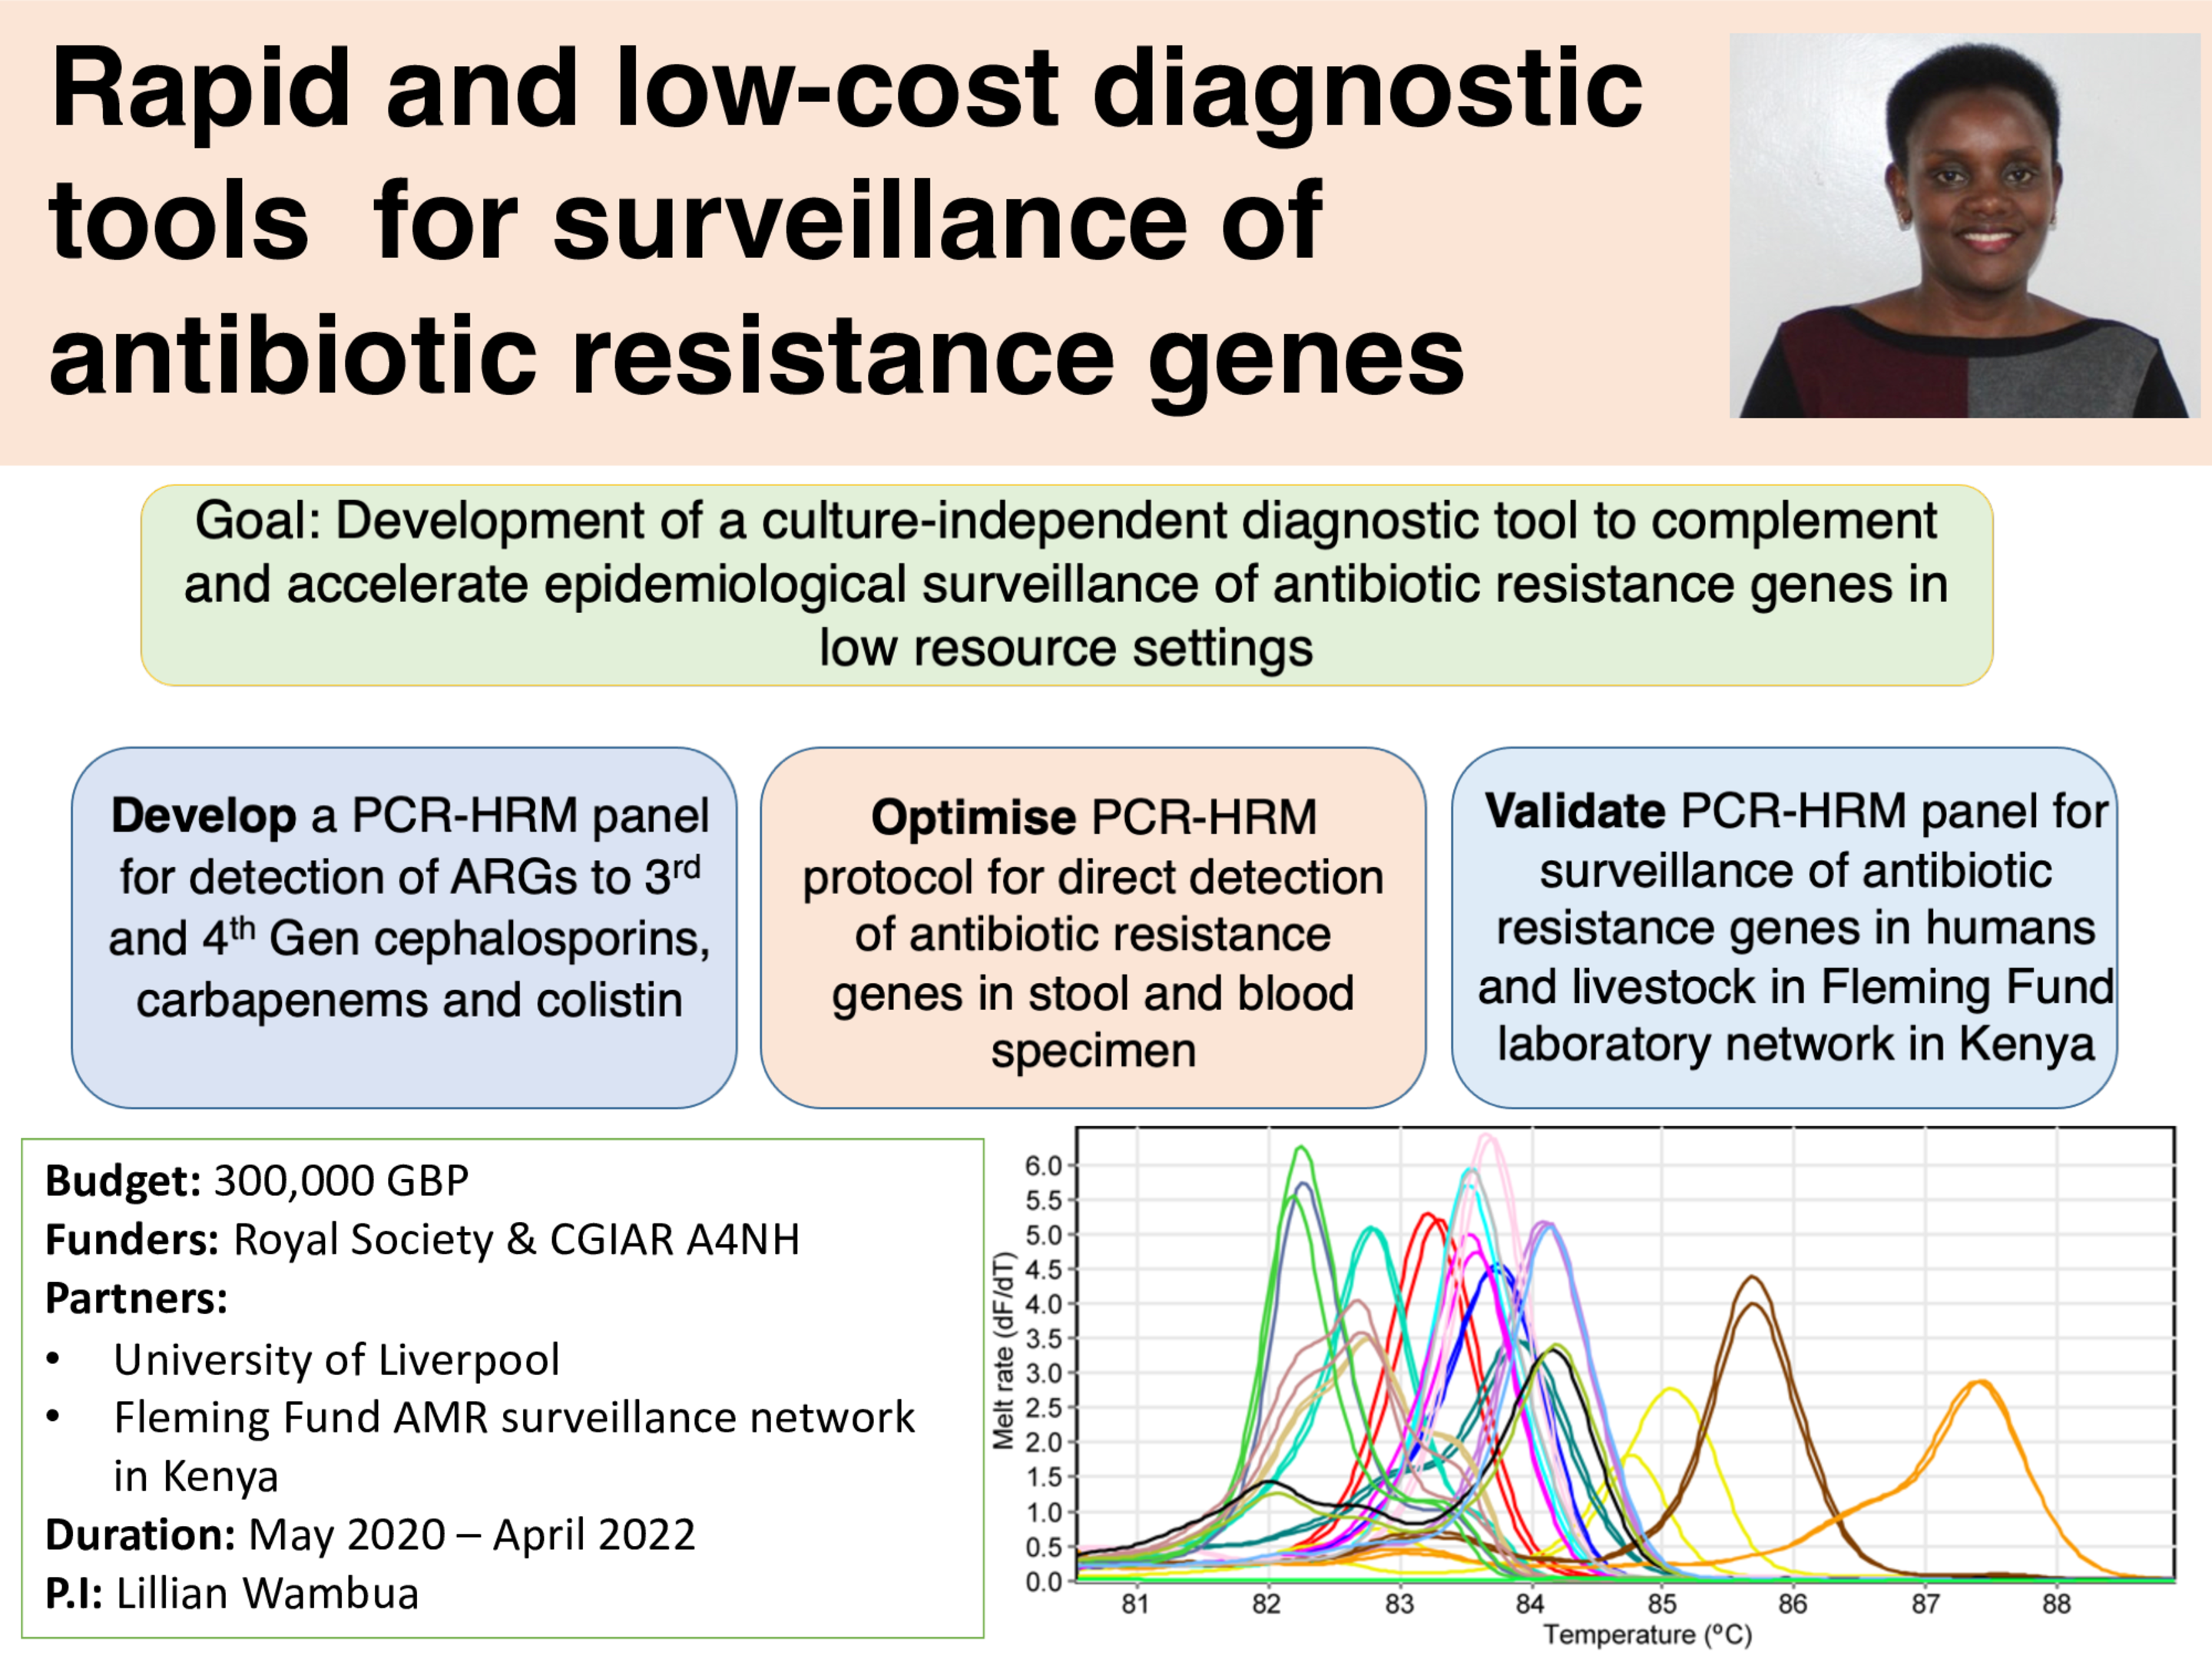 Rapid and low-cost diagnostic tools for surveillance of antibiotic resistance genes